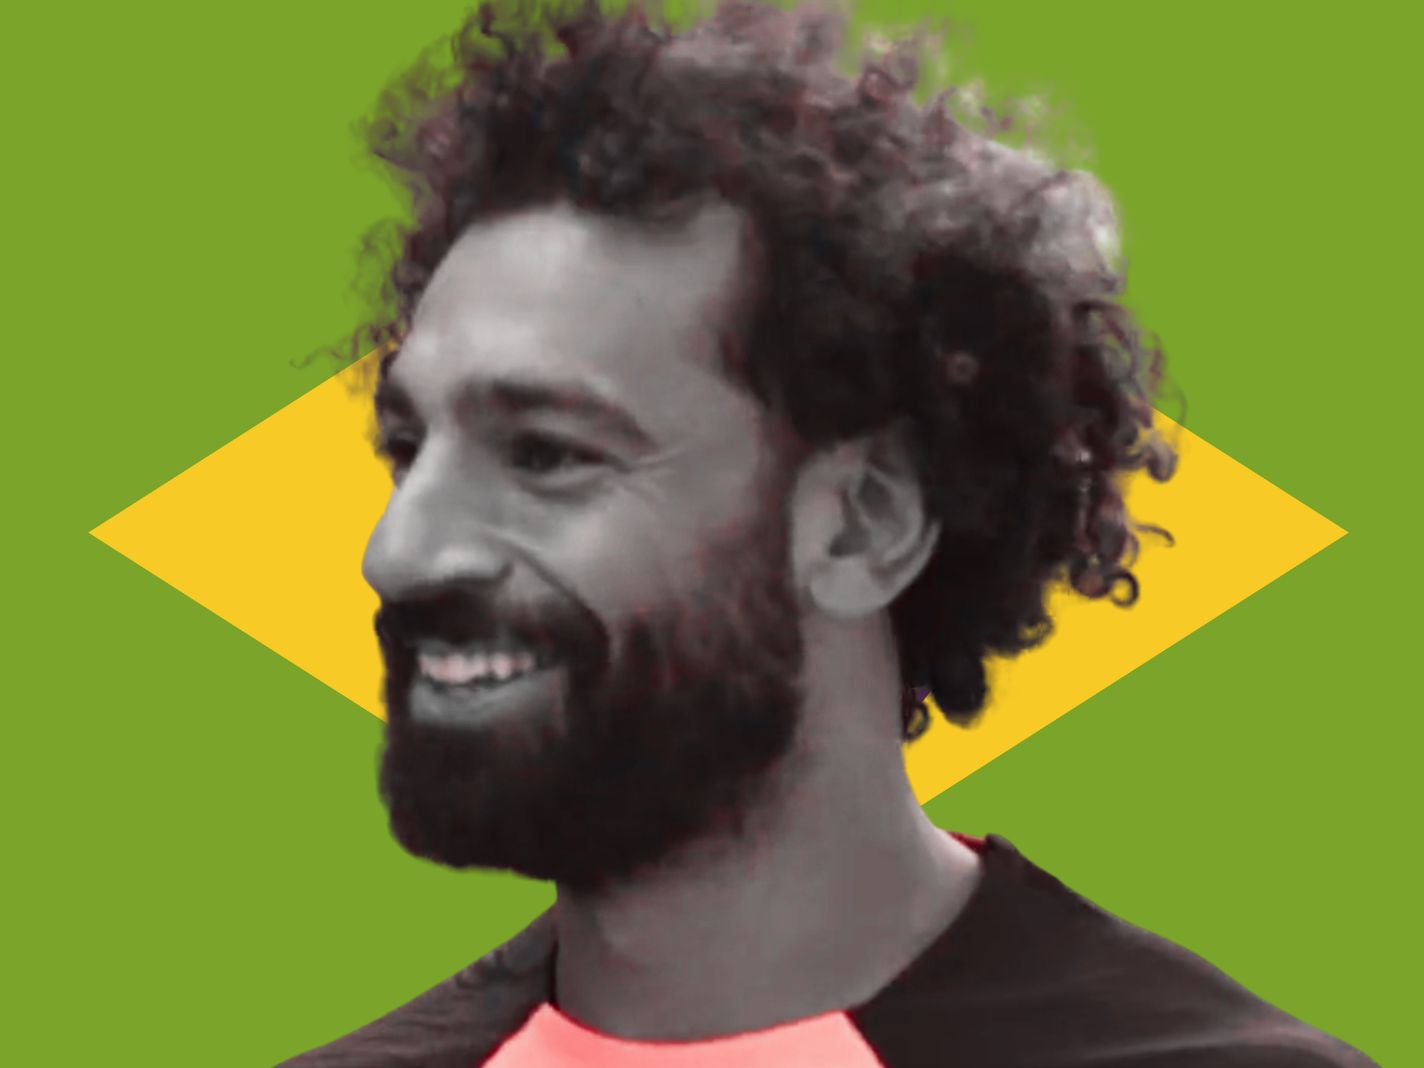 Look: Mohamed Salah’s Iconic Status Shines Brightly even in Remote Brazil Favelas